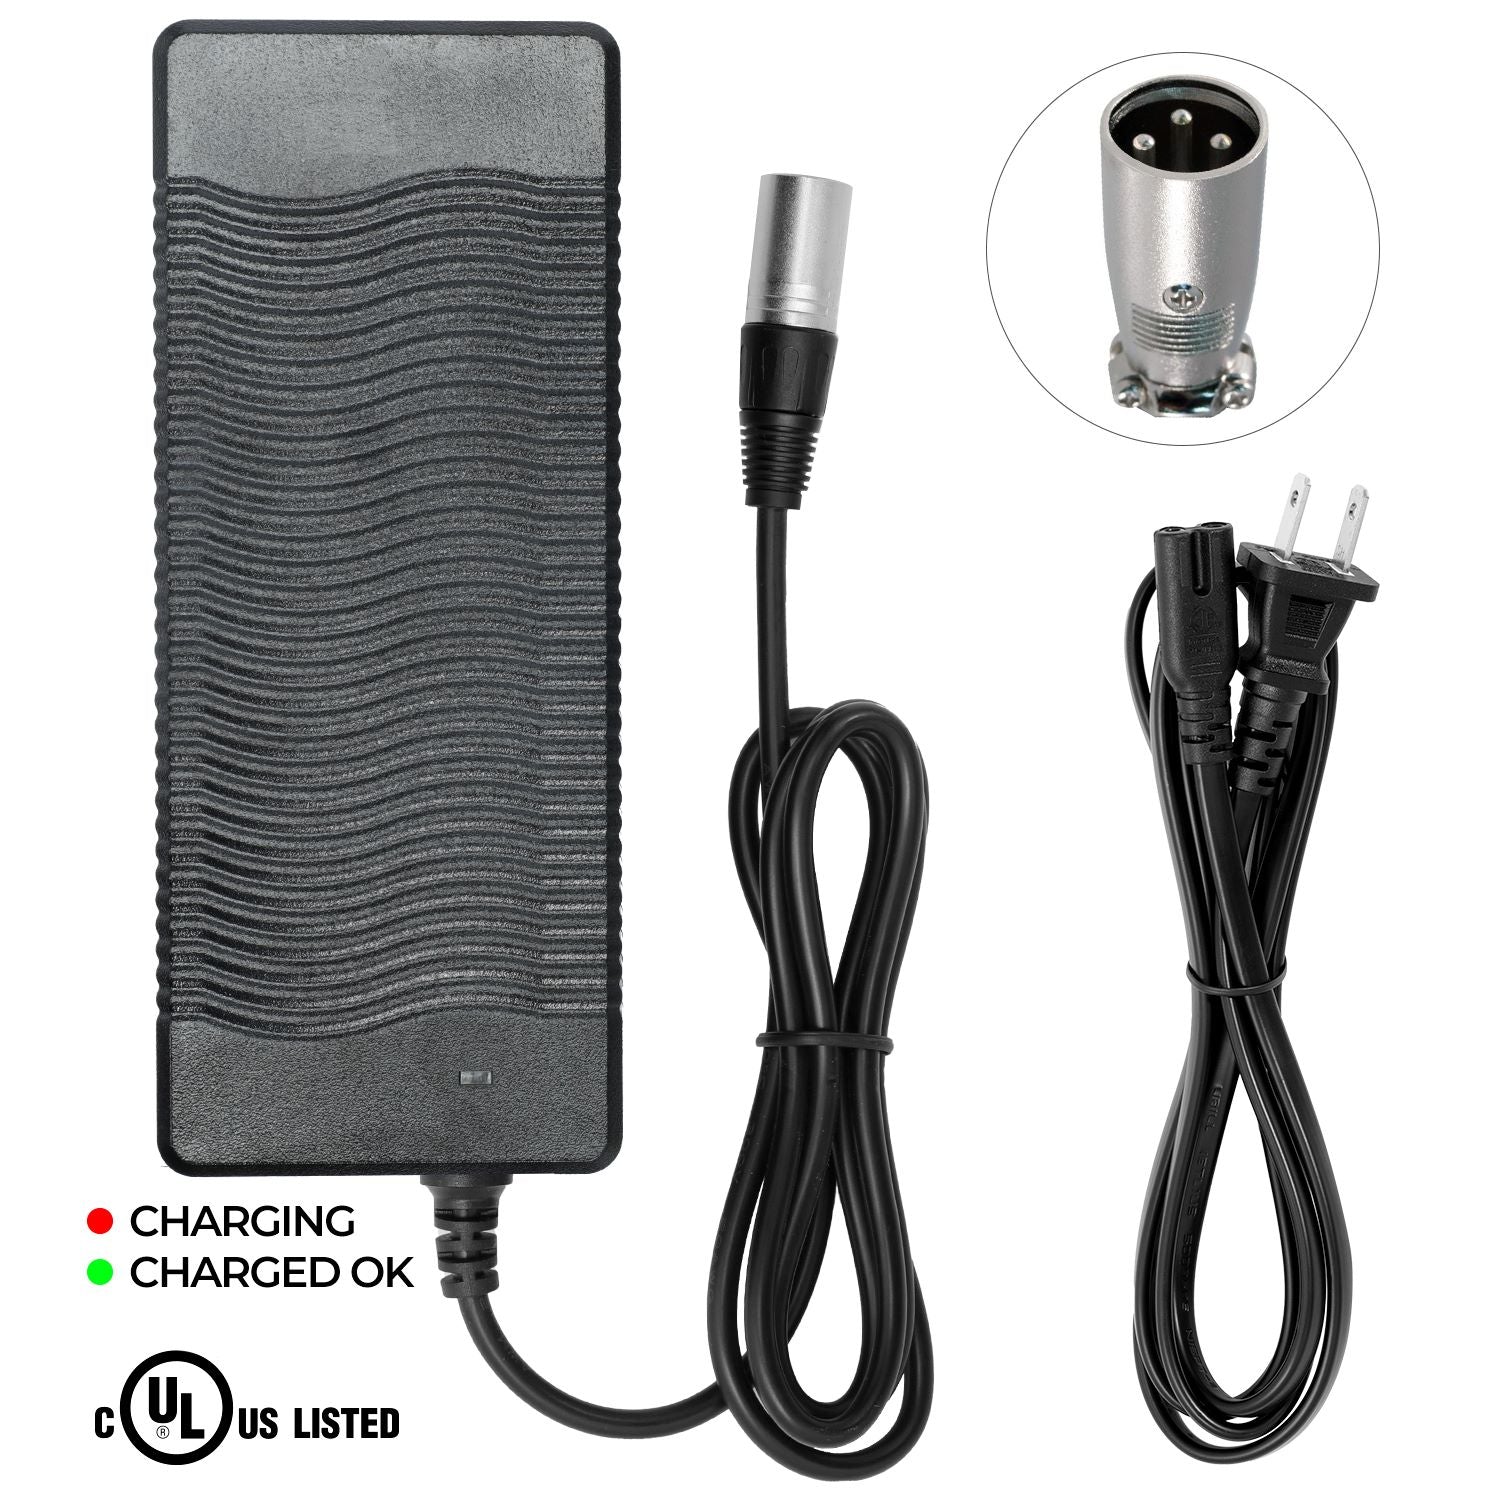 Charger for Ariel Rider eBikes